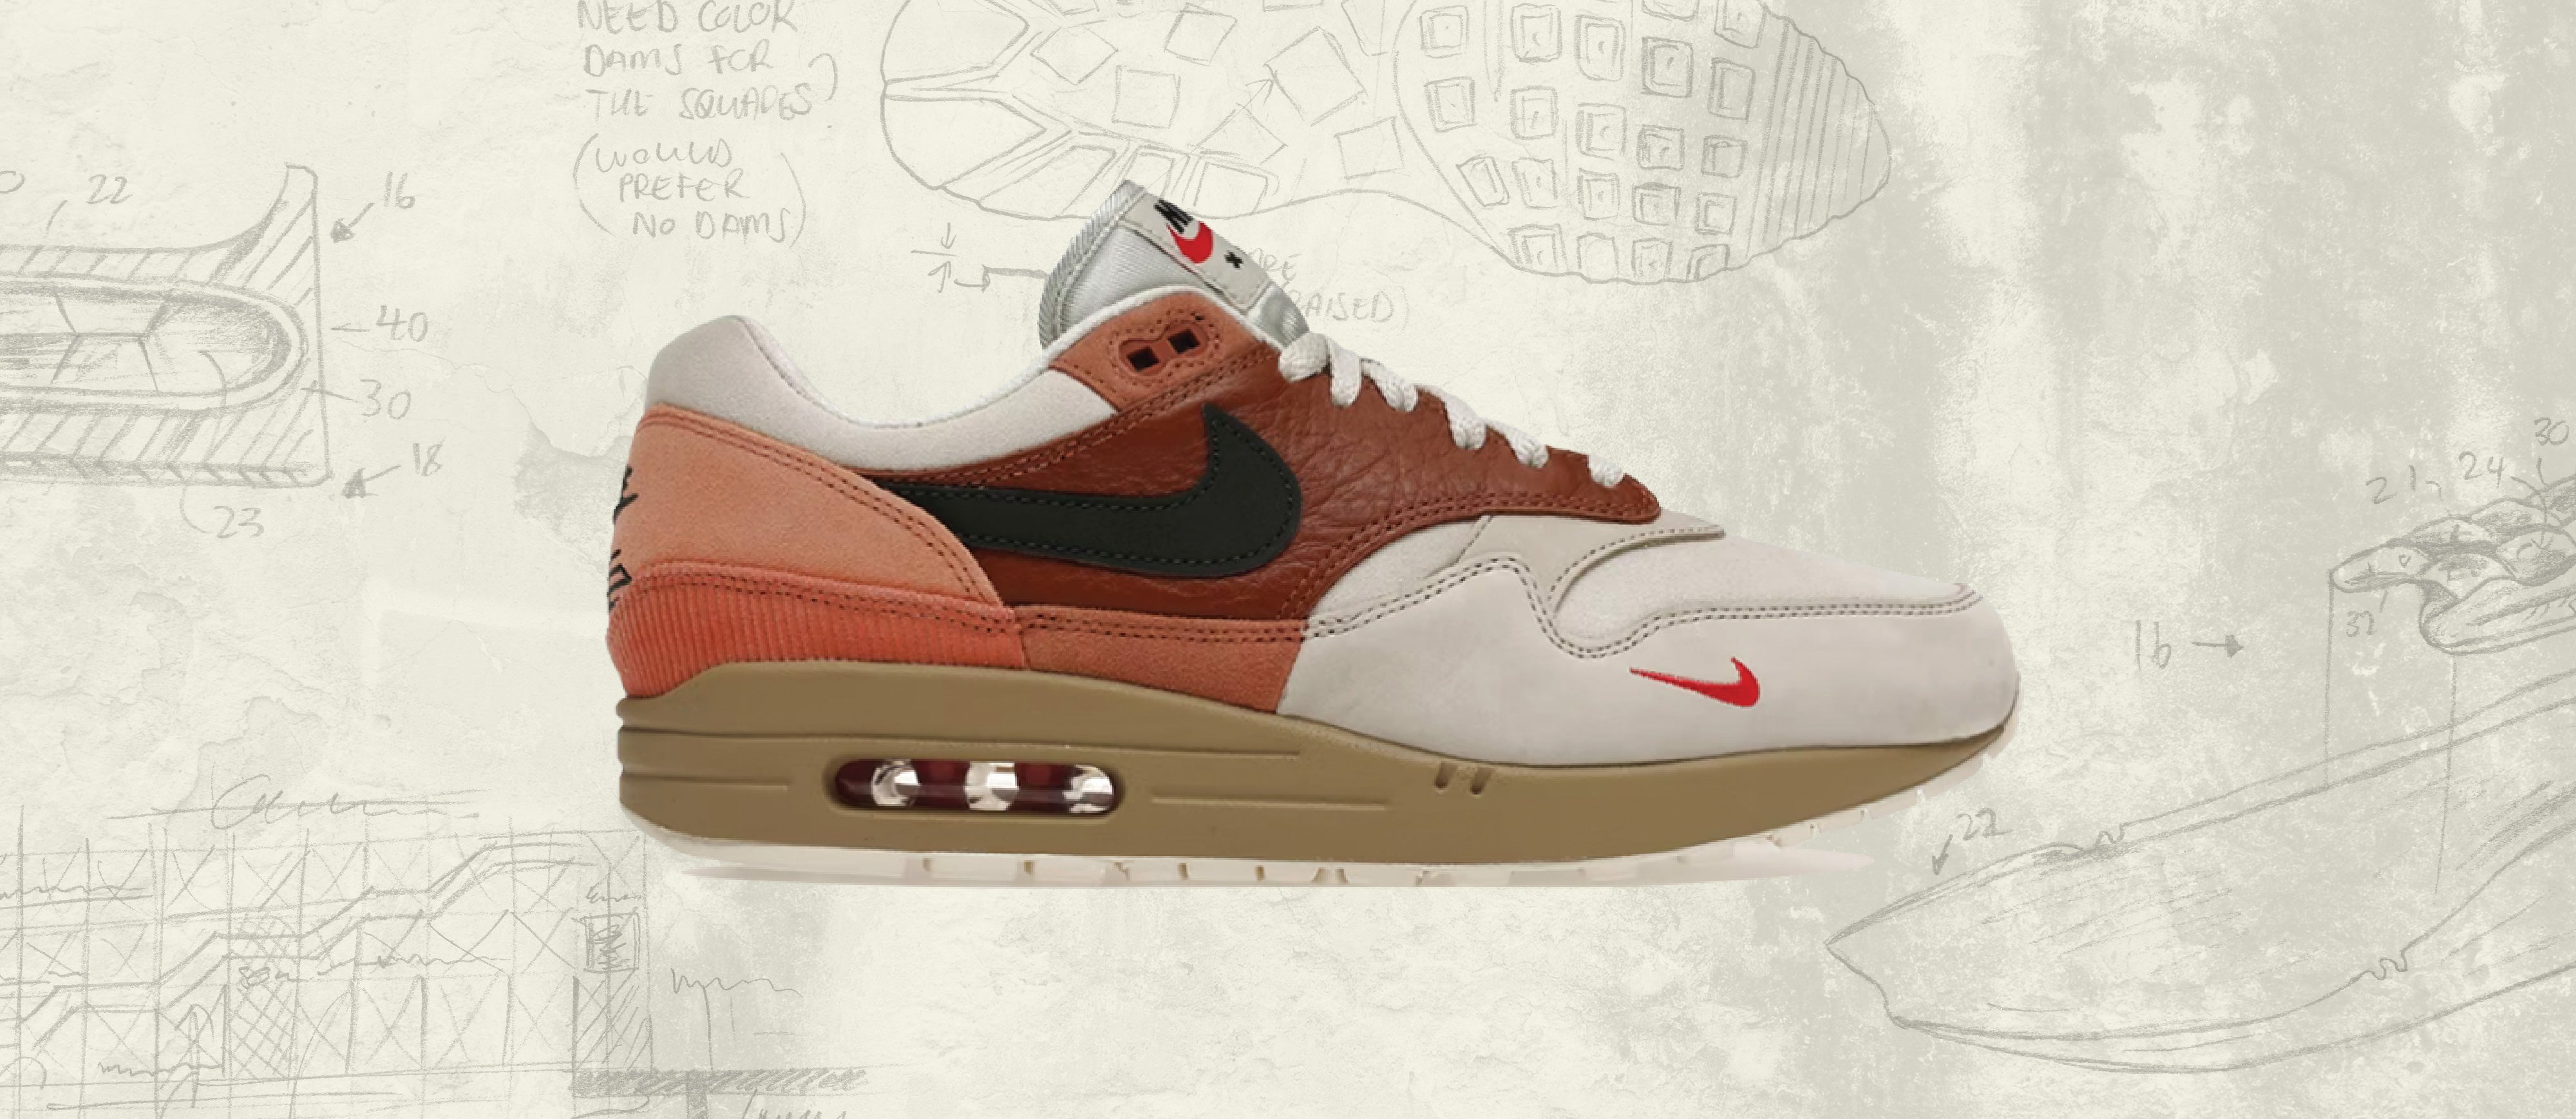 10 Best Colorways of the Nike Air Max 1